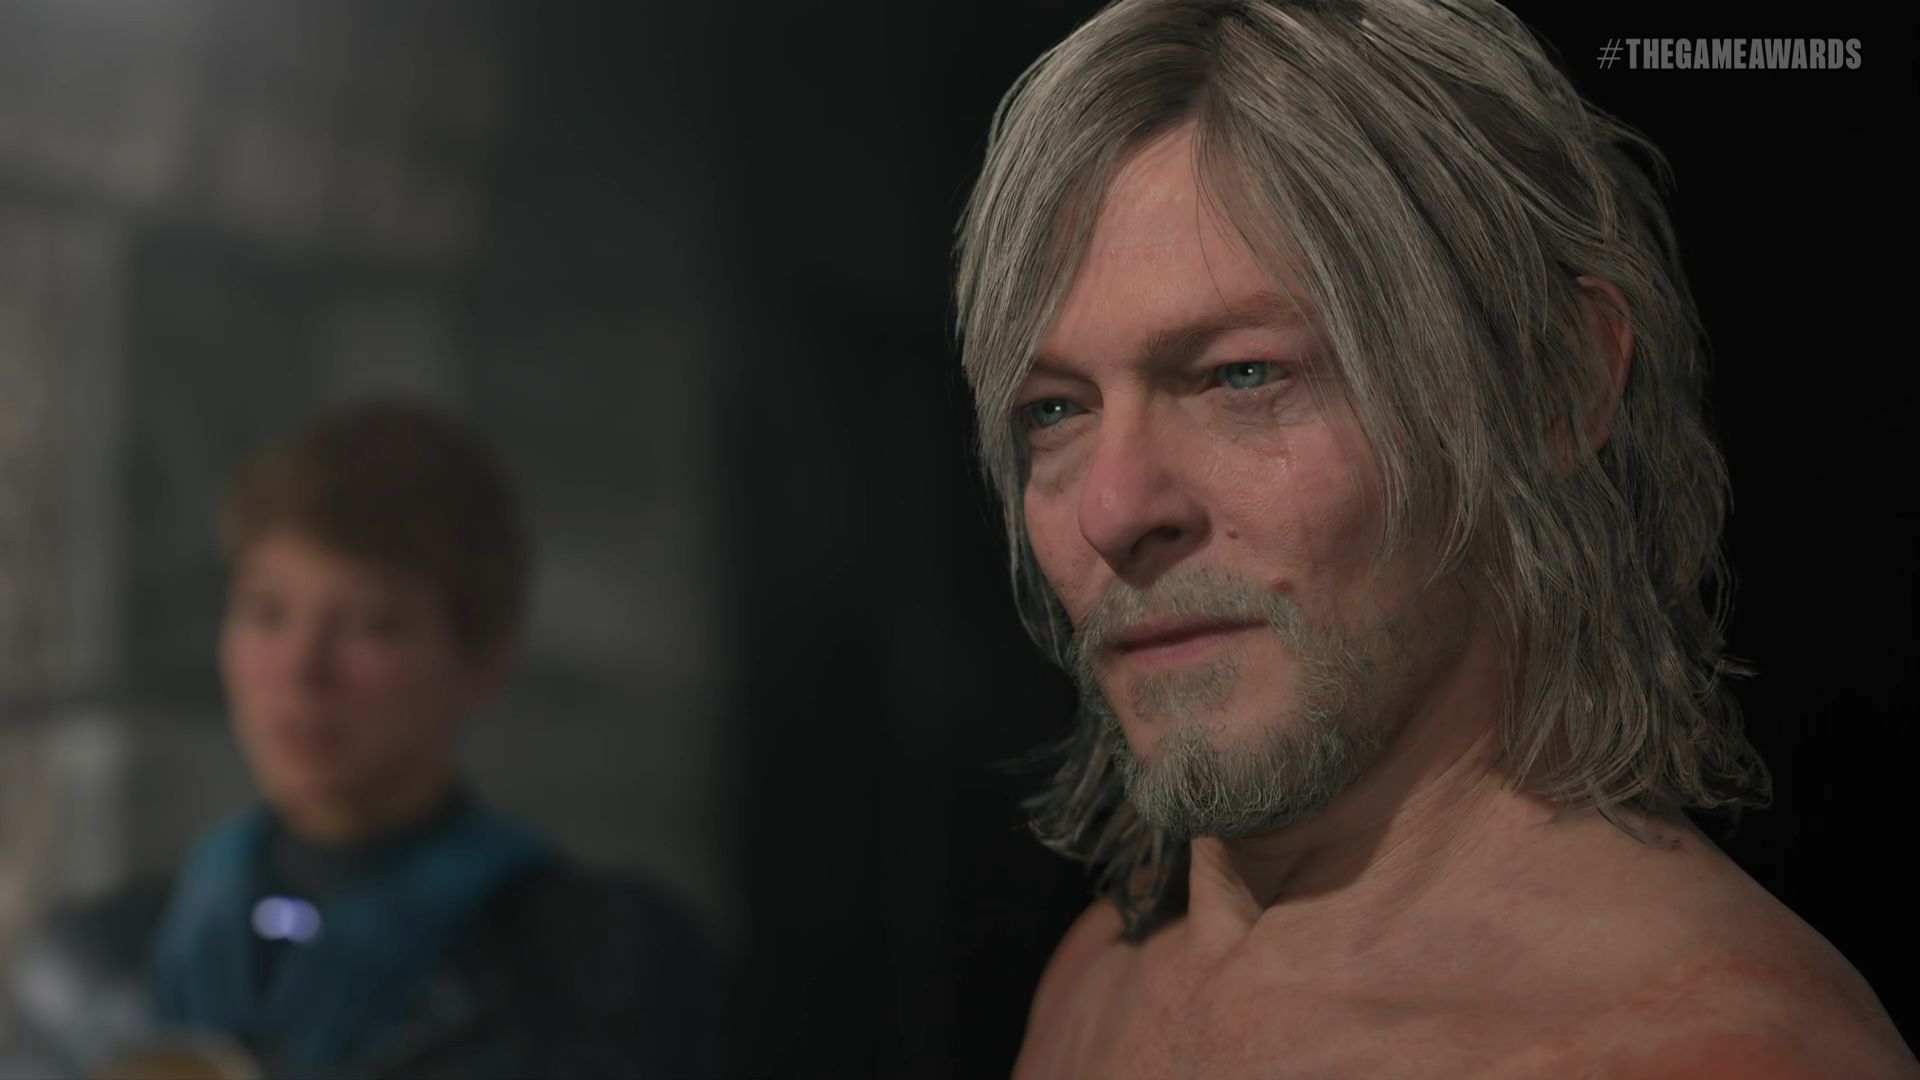 Death Stranding 2 has officially been revealed